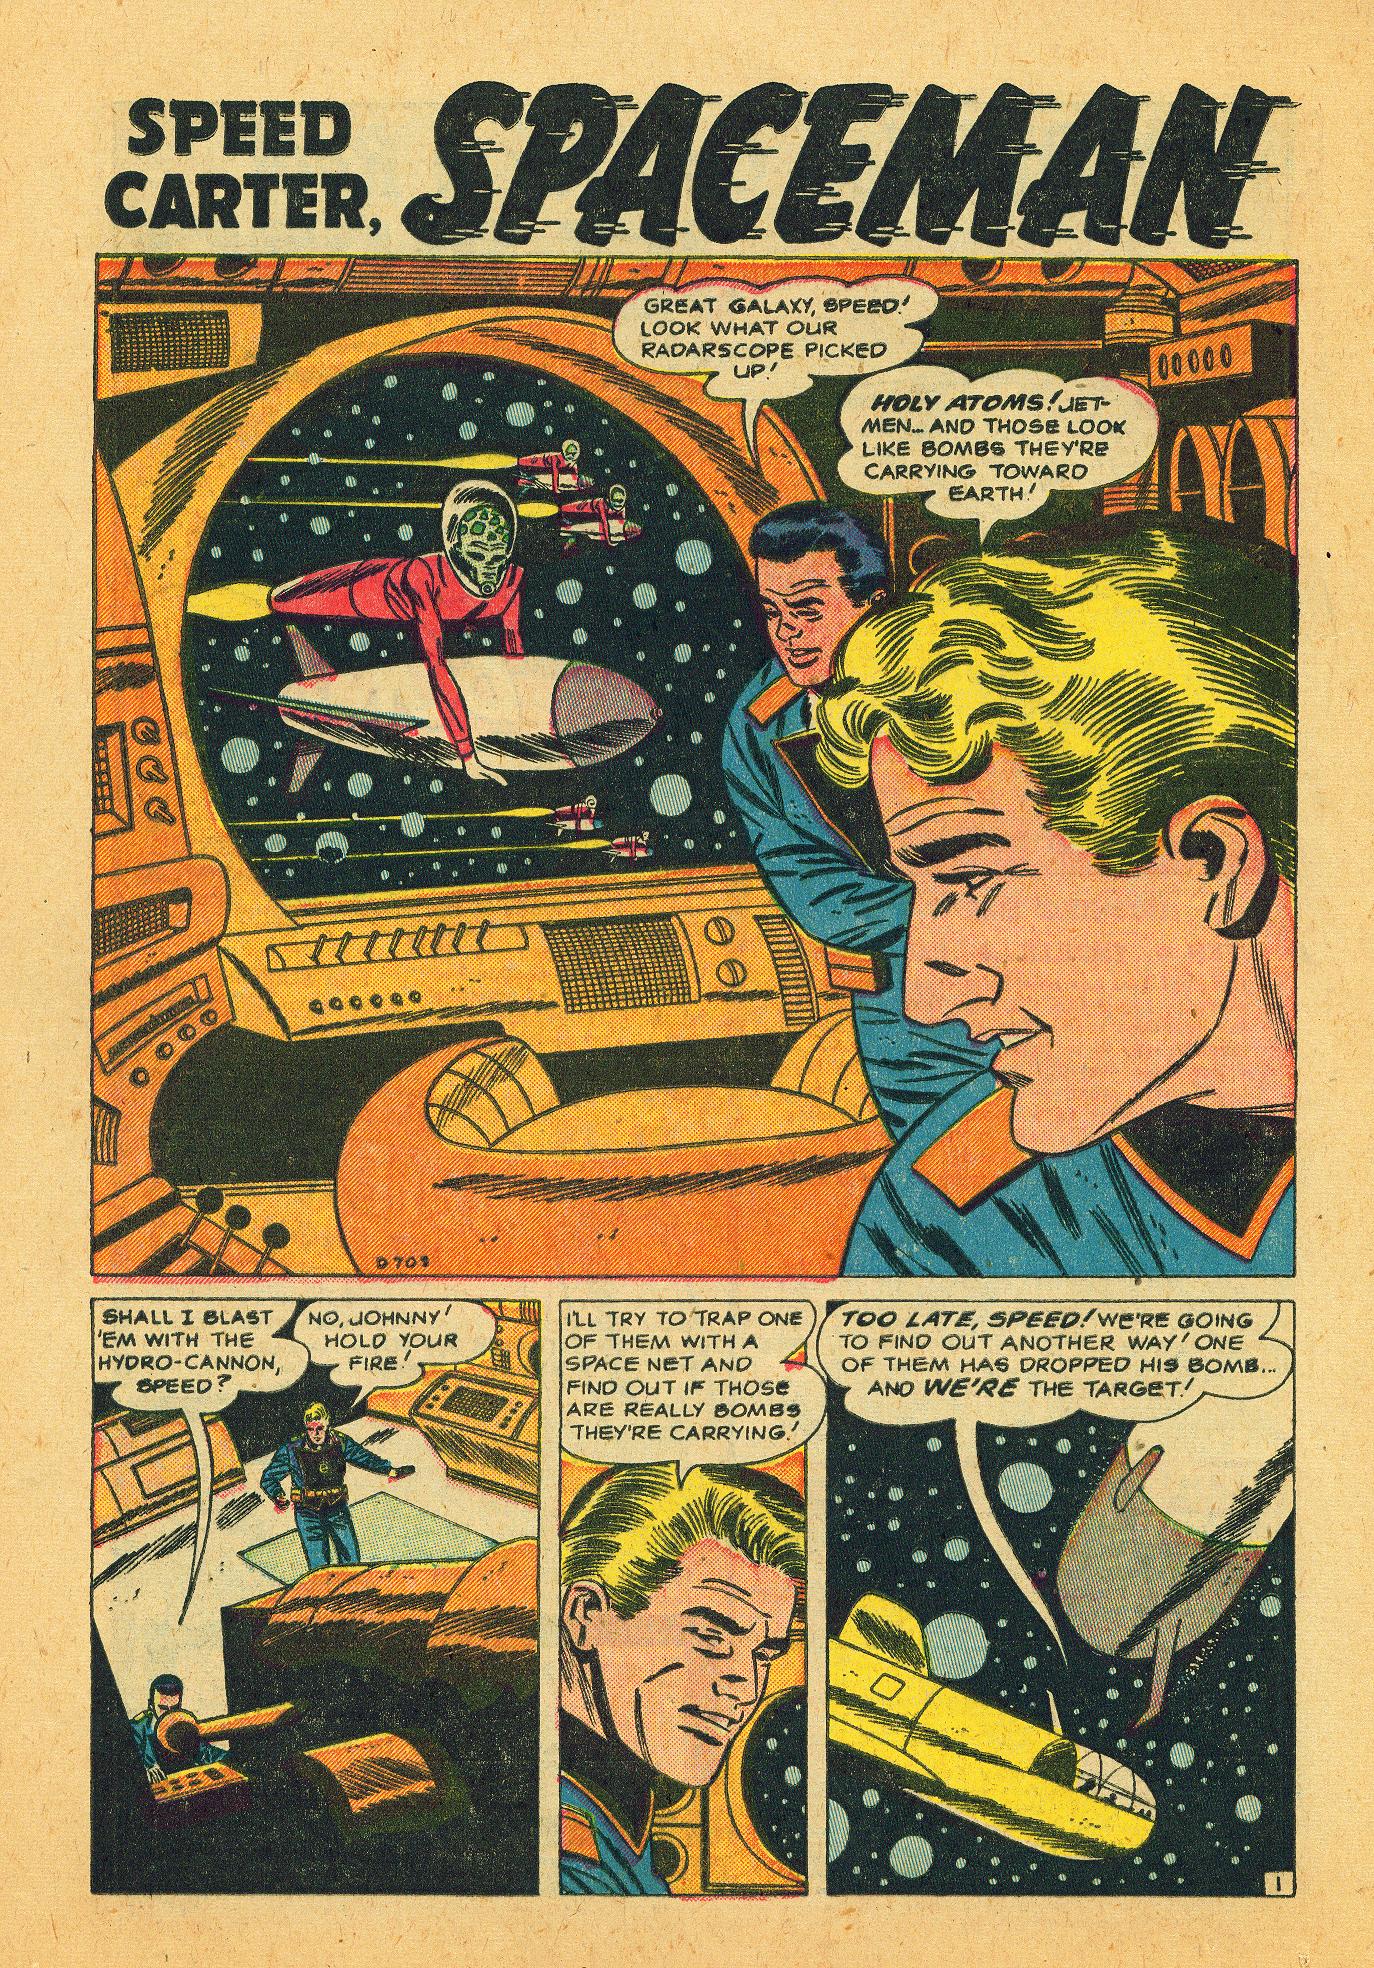 Read online Speed Carter, Spaceman comic -  Issue #4 - 12